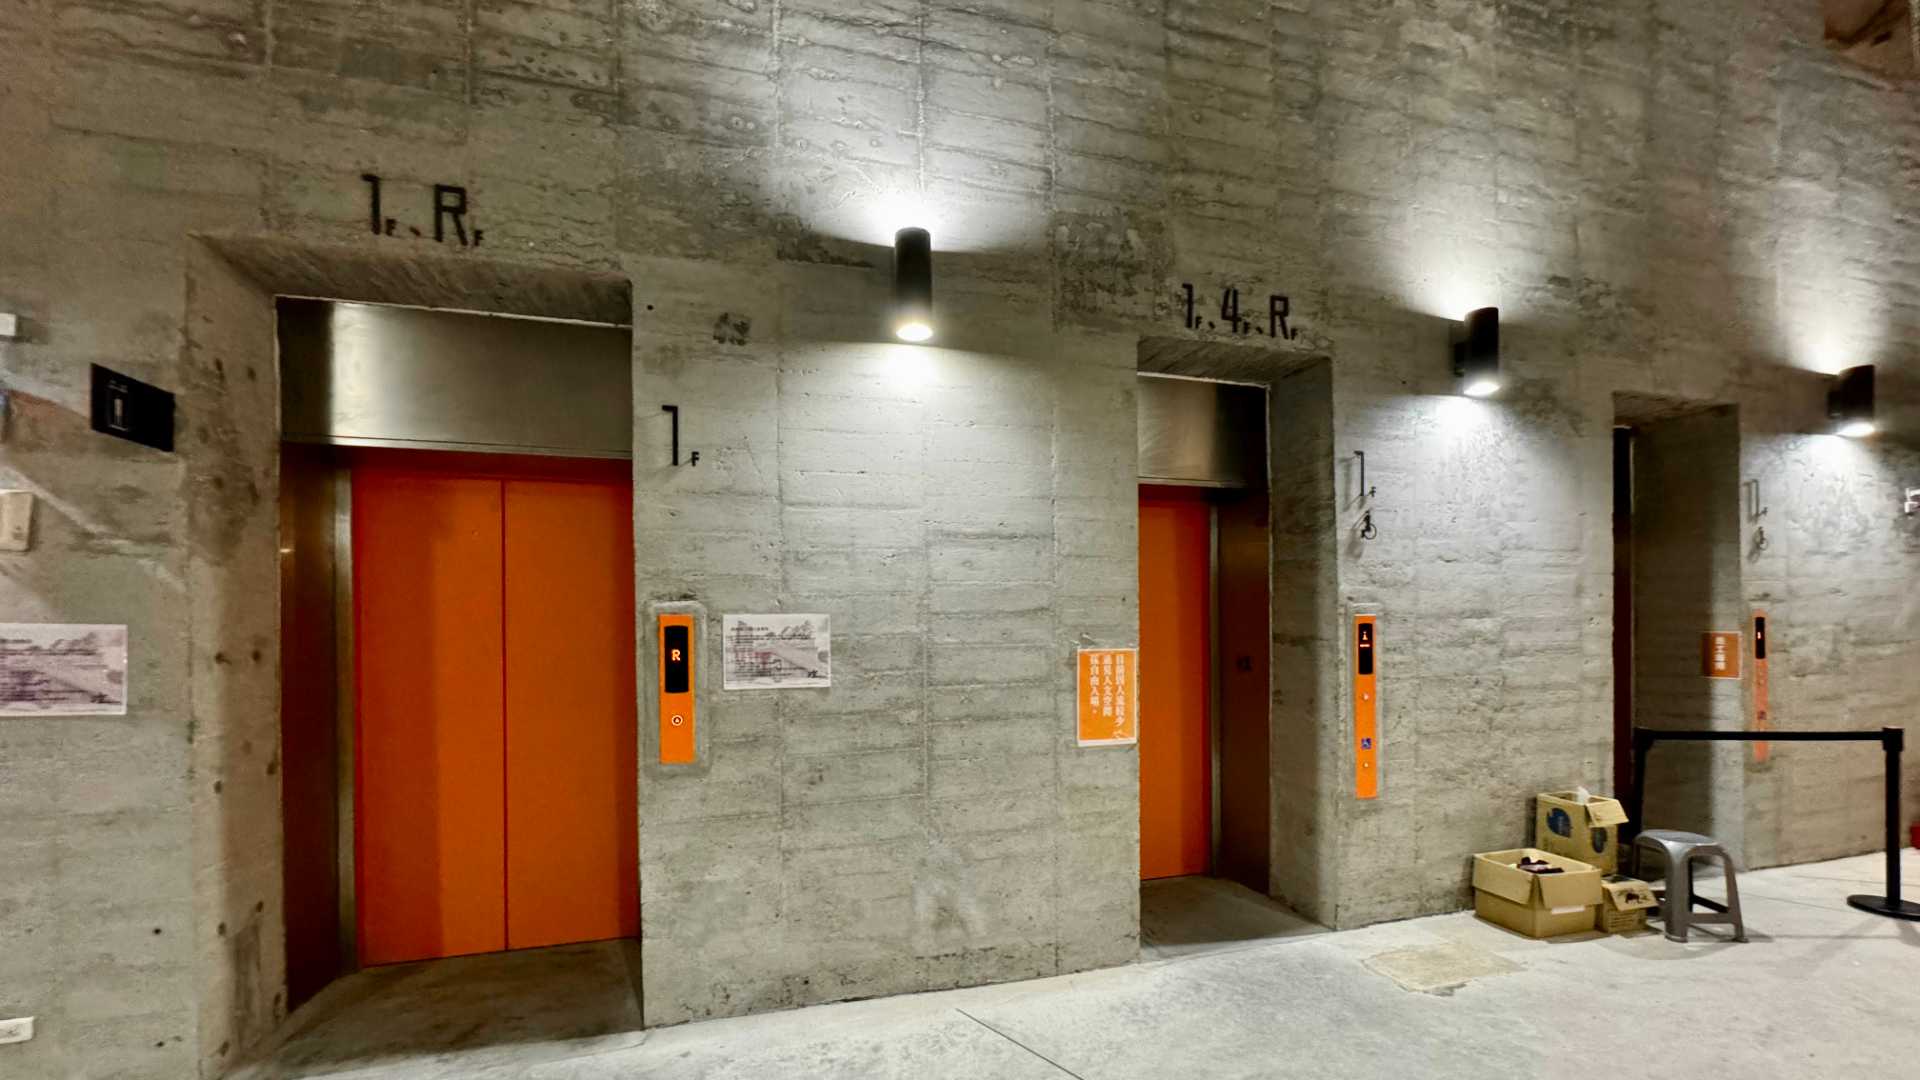 Two elevators inset in an industrial-style concrete wall. The left elevator only stops at the first floor and the roof. The right elevator also stops at the fourth floor.